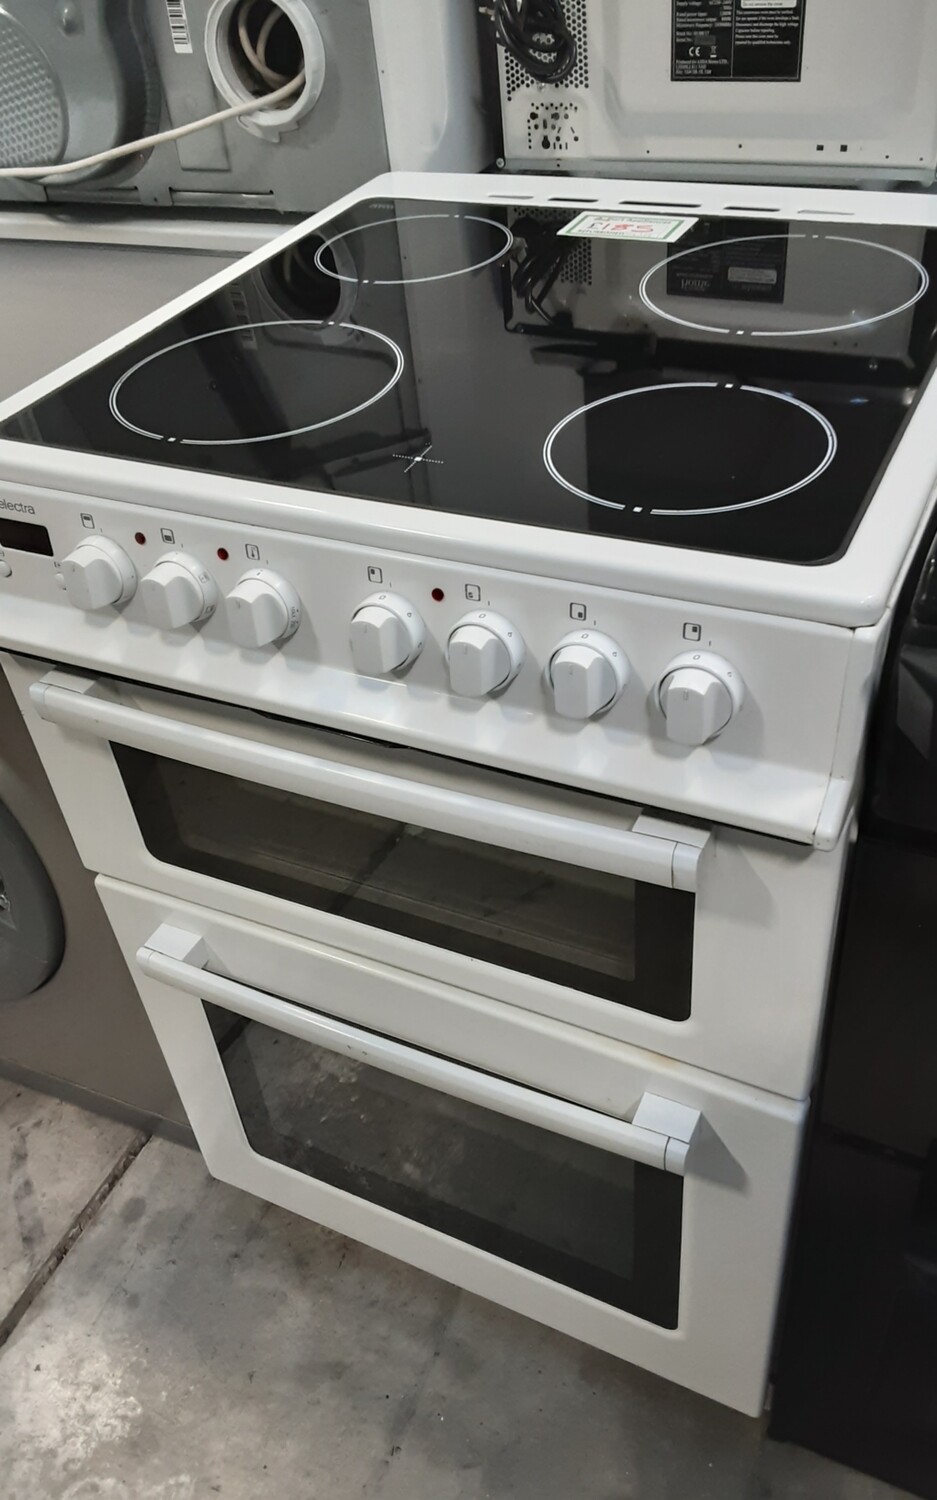 Electra 60cm Electric Cooker fan oven with Ceramic Hob - White - Refurbished 6 Month Guarantee 